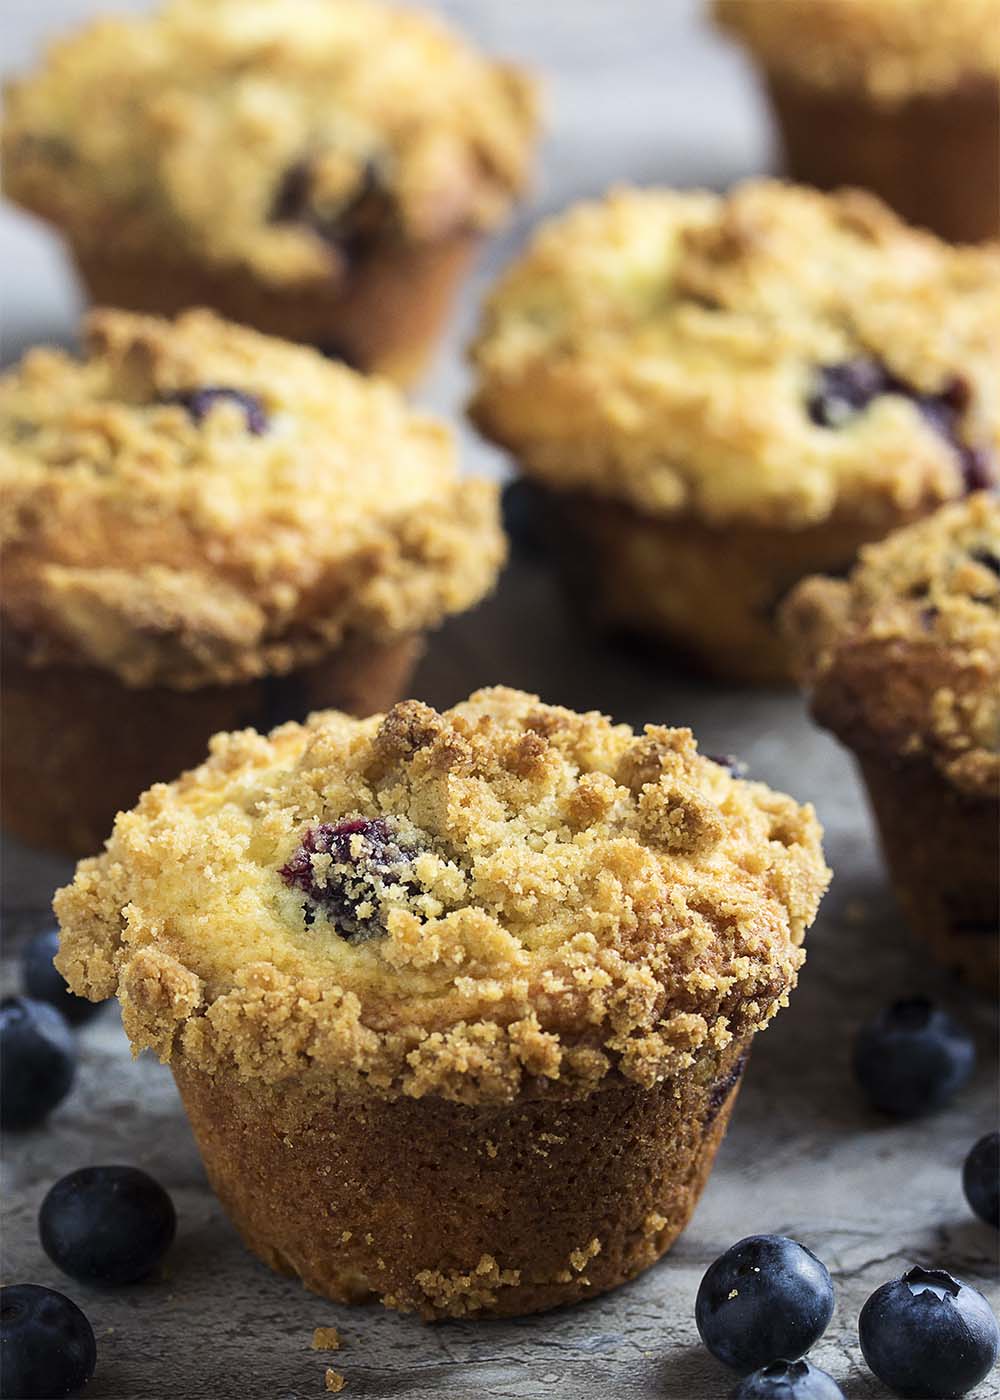 Meyer lemons provide a great, complex, floral flavor to this easy recipe for crumb topped blueberry ricotta muffins. Great for breakfast or any time of the day! | justalittlebitofbacon.com